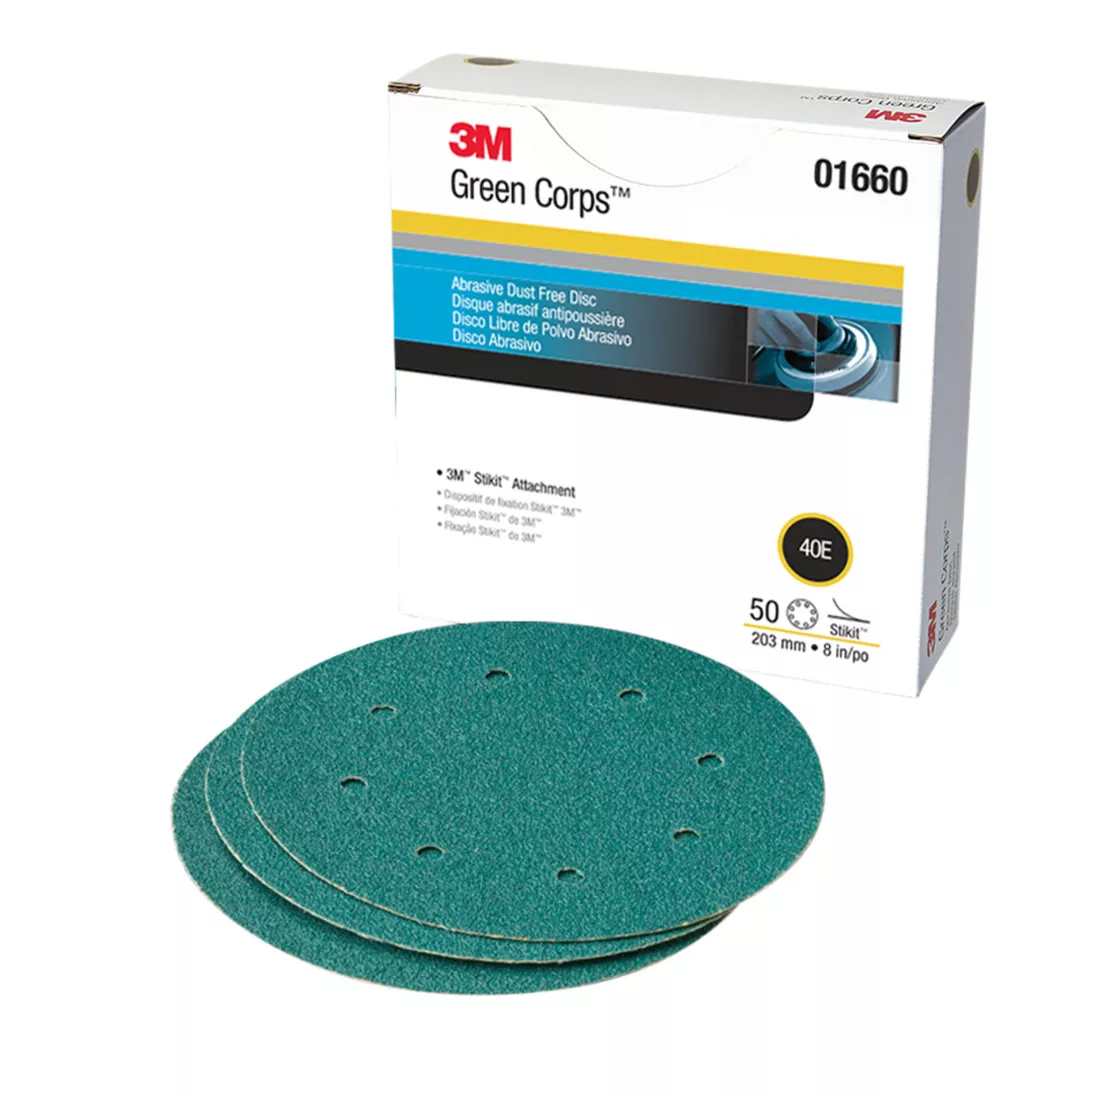 3M™ Green Corps™ Stikit™ Production Disc Dust Free, 01660, 8 in, 40, 50
discs per carton, 5 cartons per case